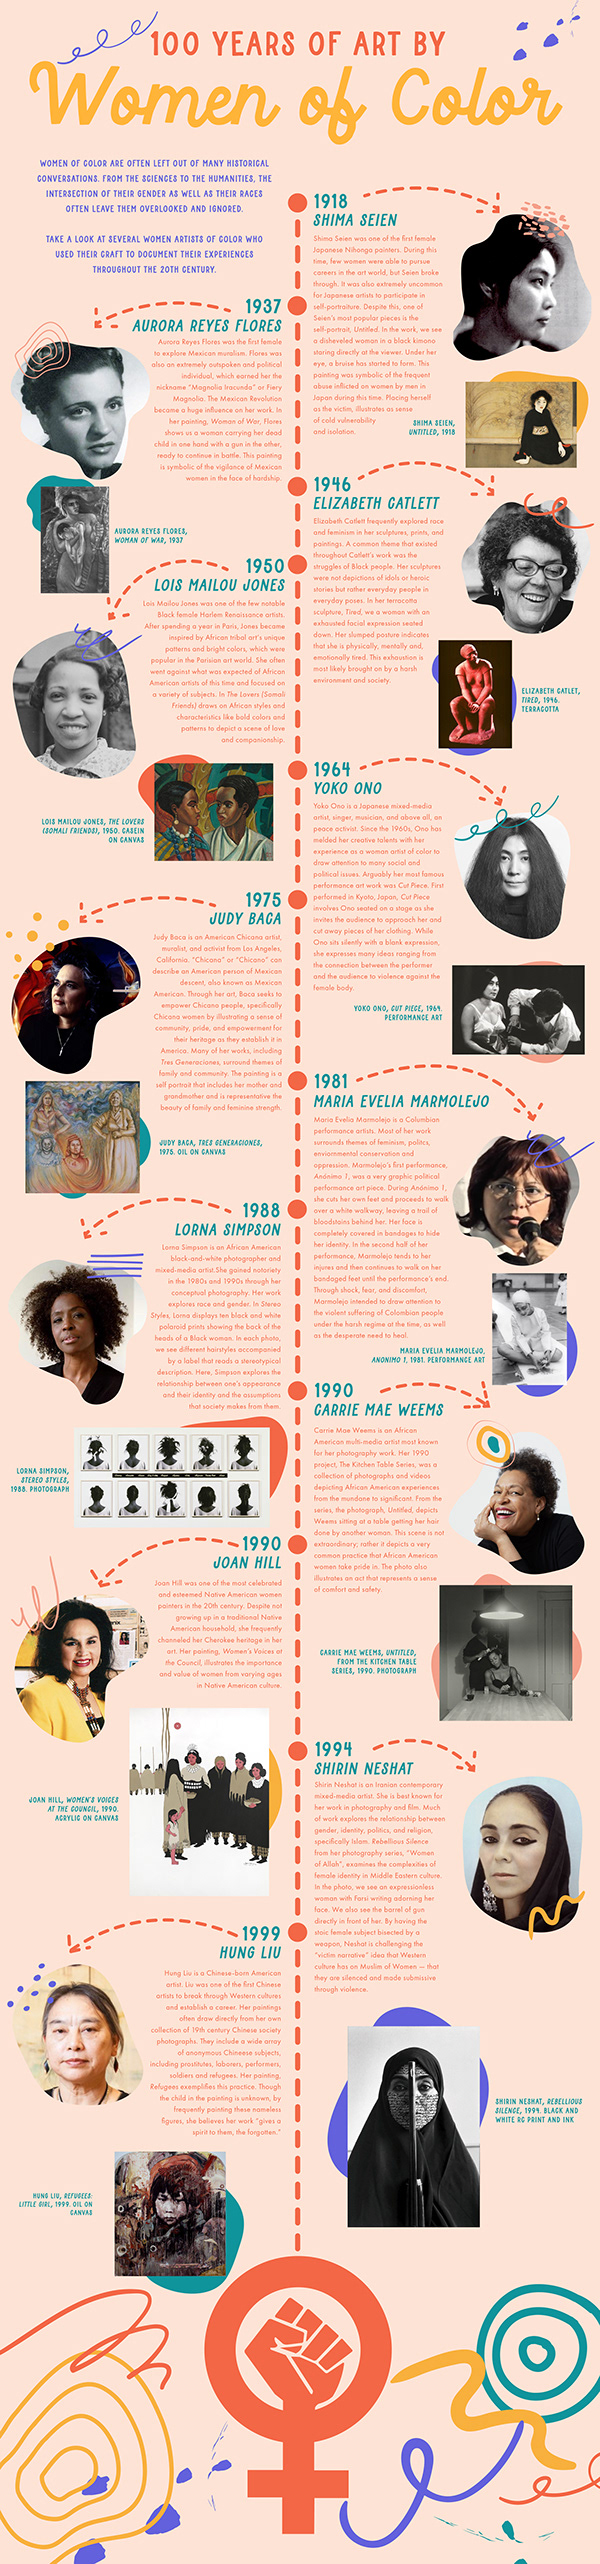 100 Years of Art by Women of Color